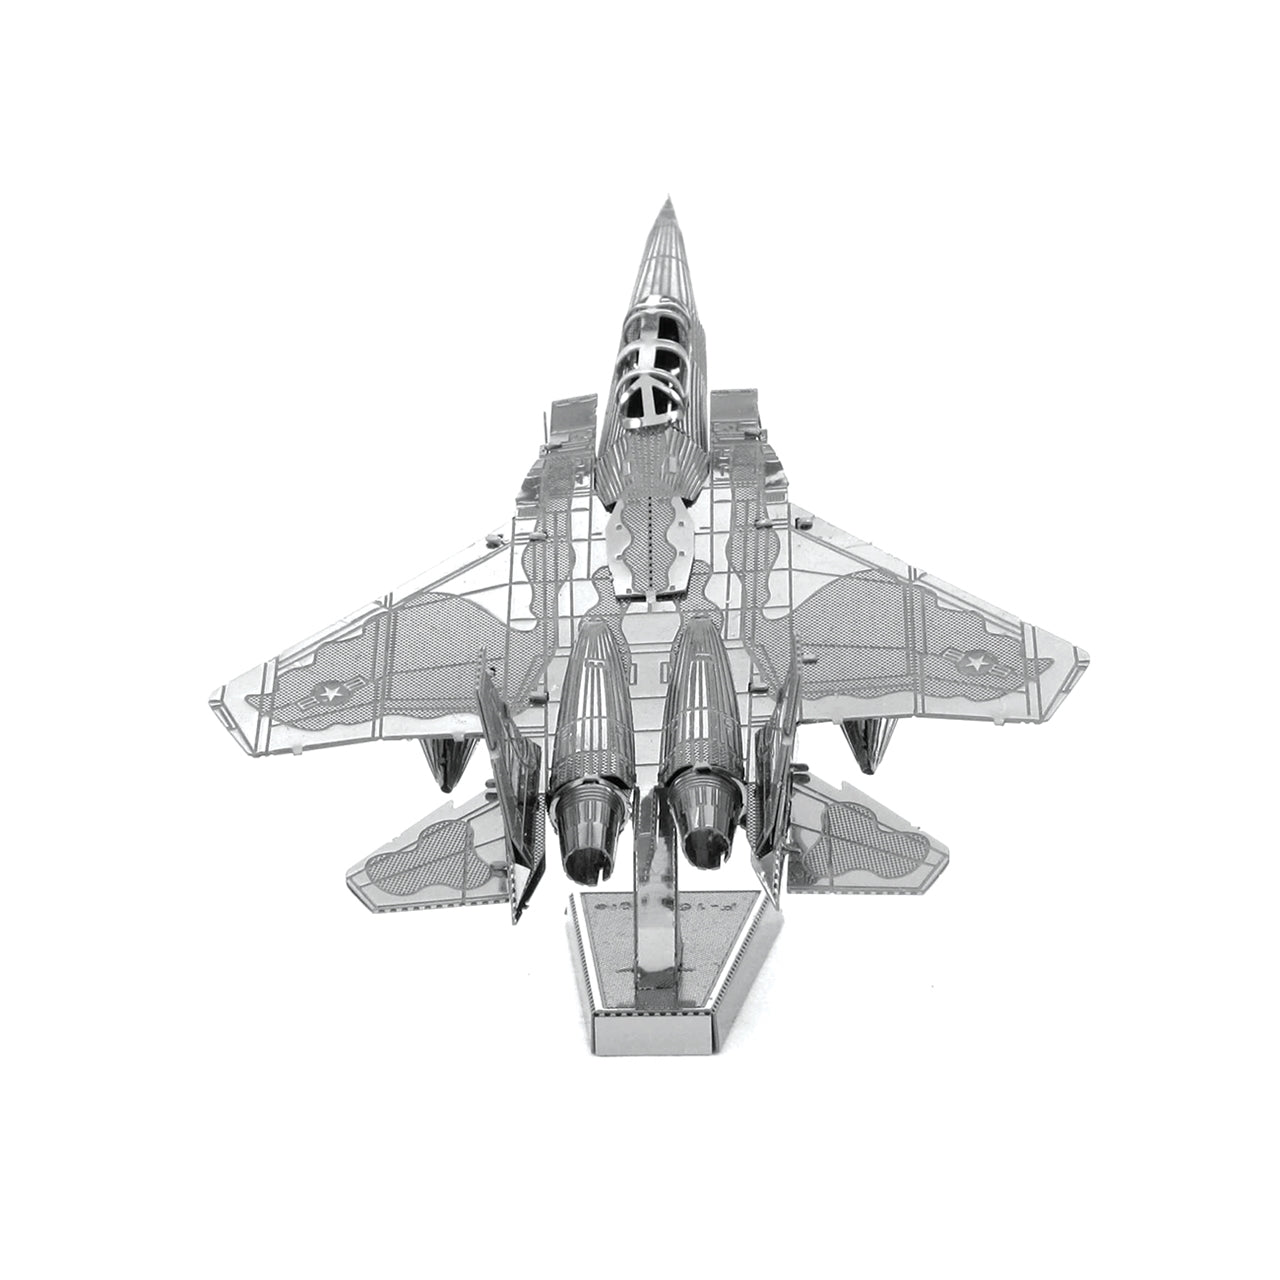 FMW082 Eagle F-15 Aircraft (Assembleable) (Discontinued Model)